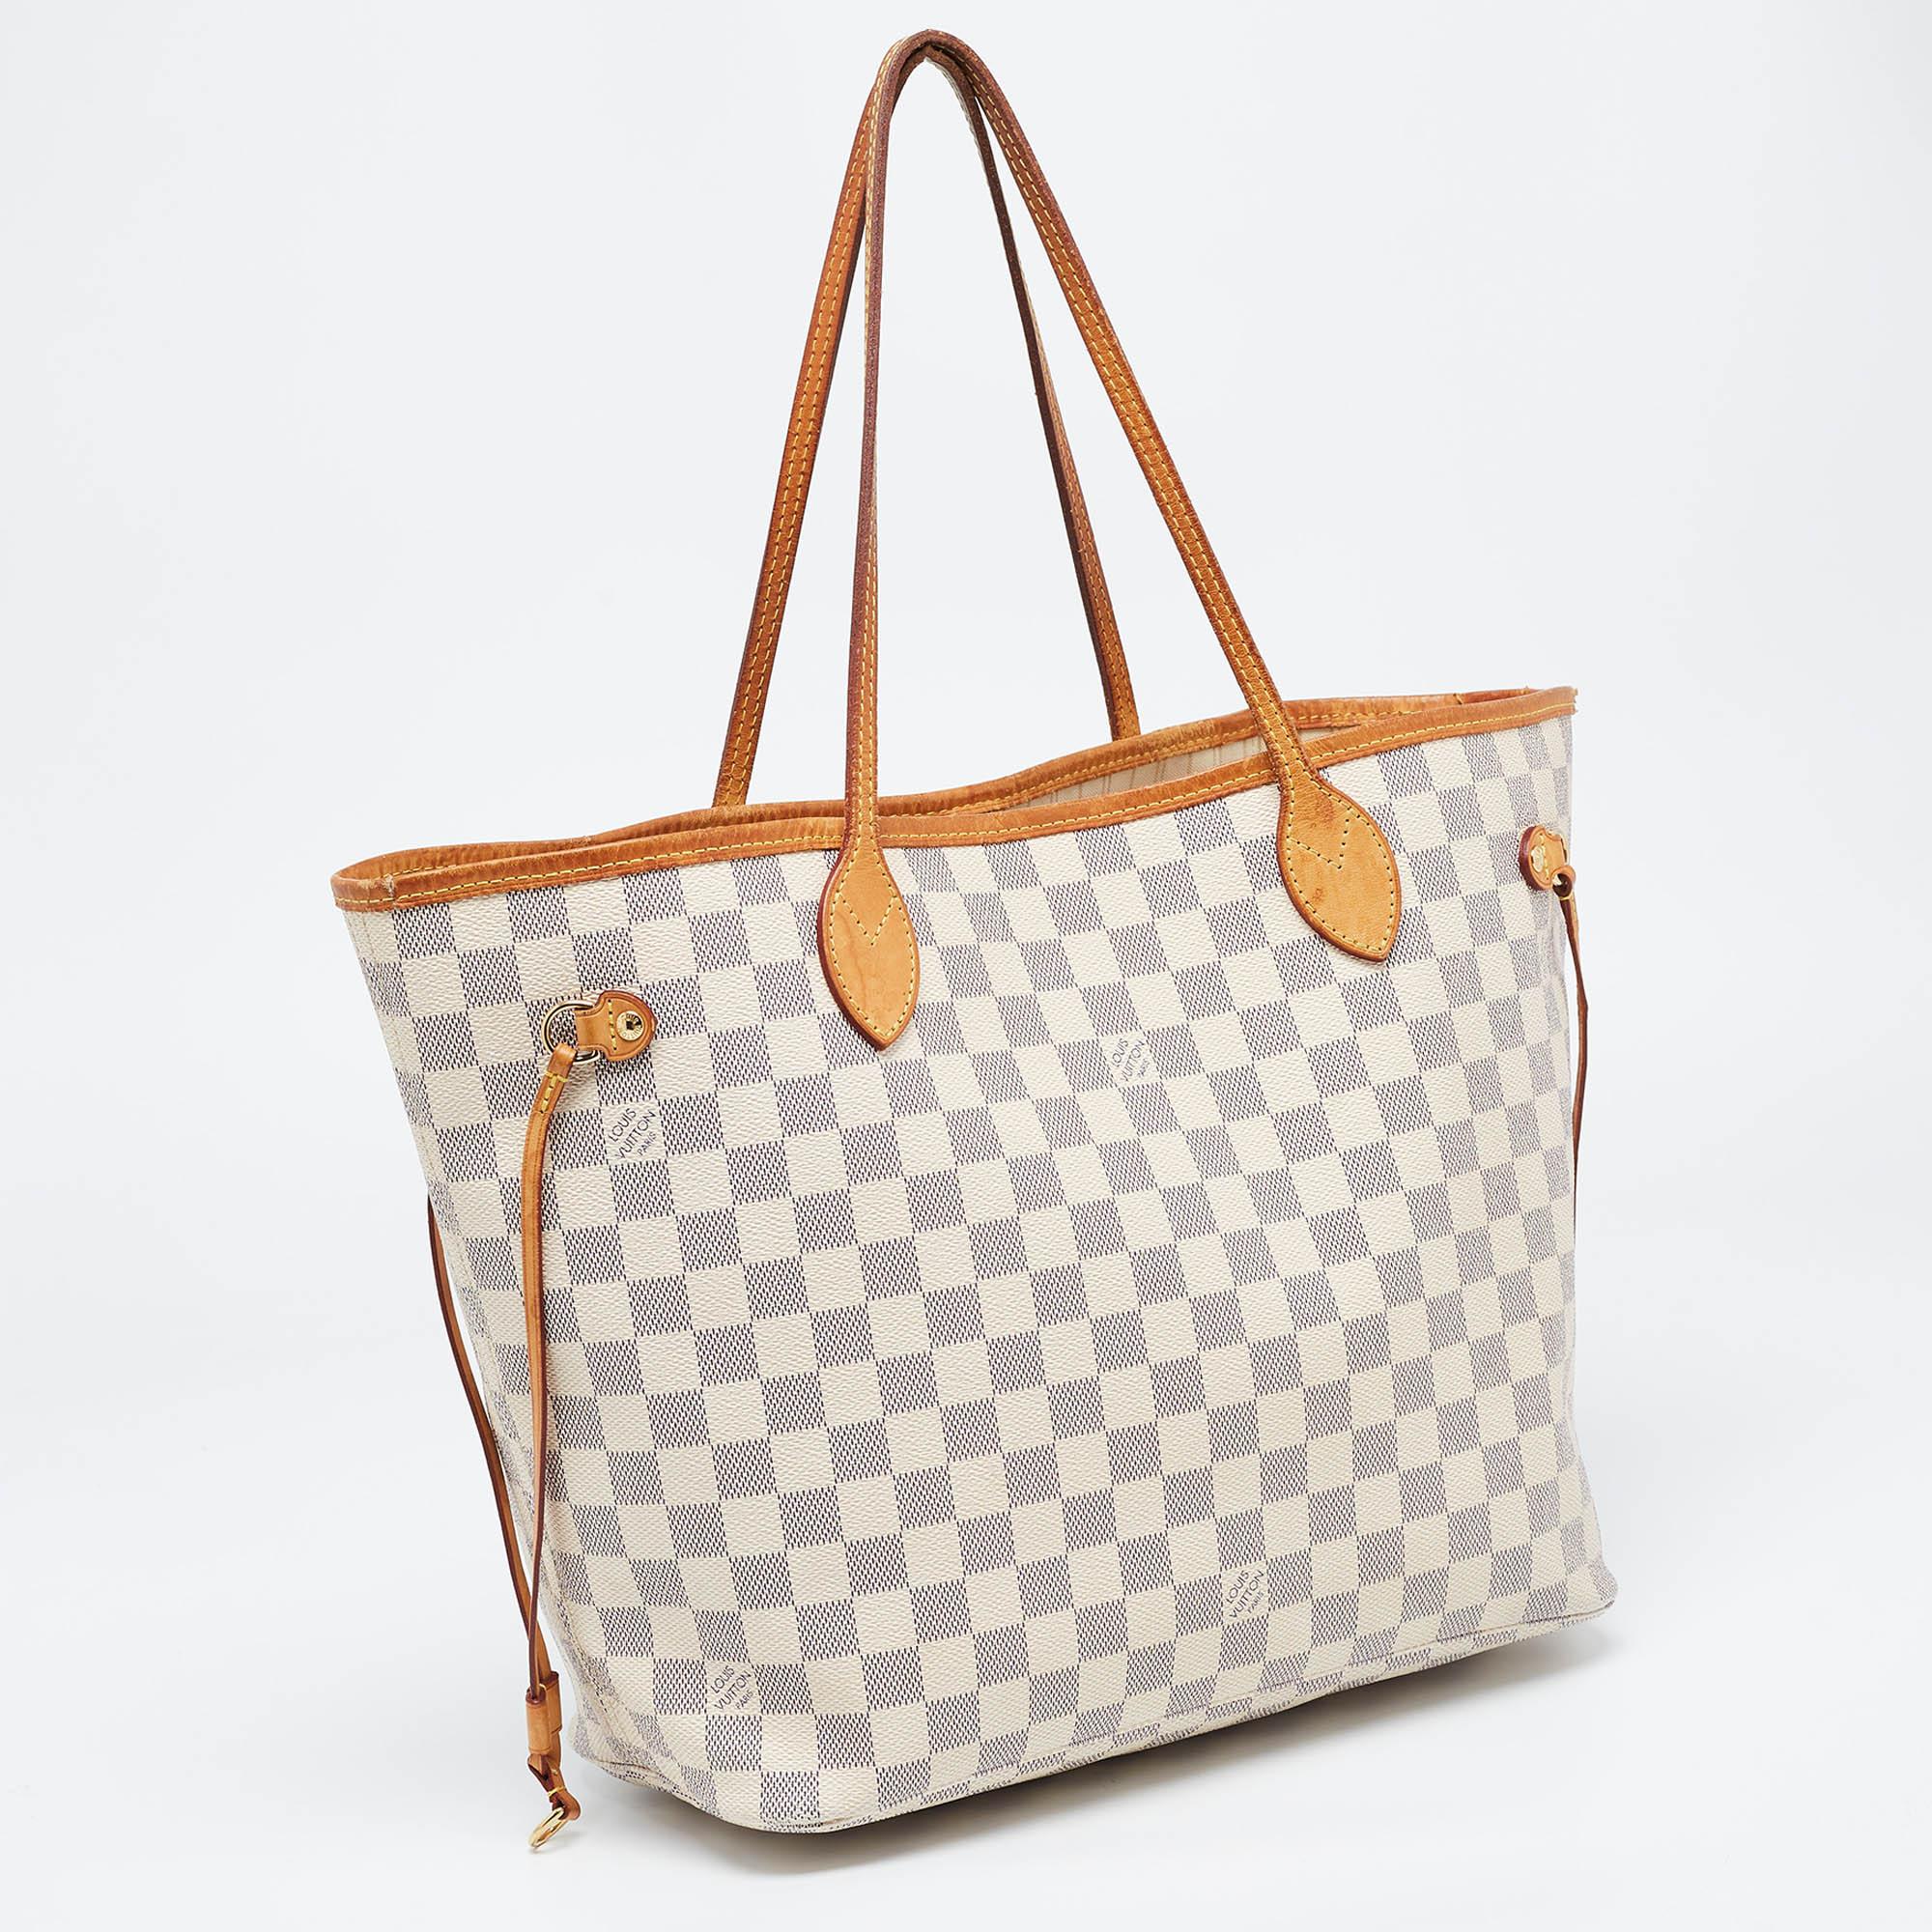 Introduced in 2007, the Neverfull by Louis Vuitton is applauded for its innovative design and faultless craftsmanship. This MM bag comes crafted from Damier Azur canvas, and its classy features contribute to its timeless elegance. It is held at the